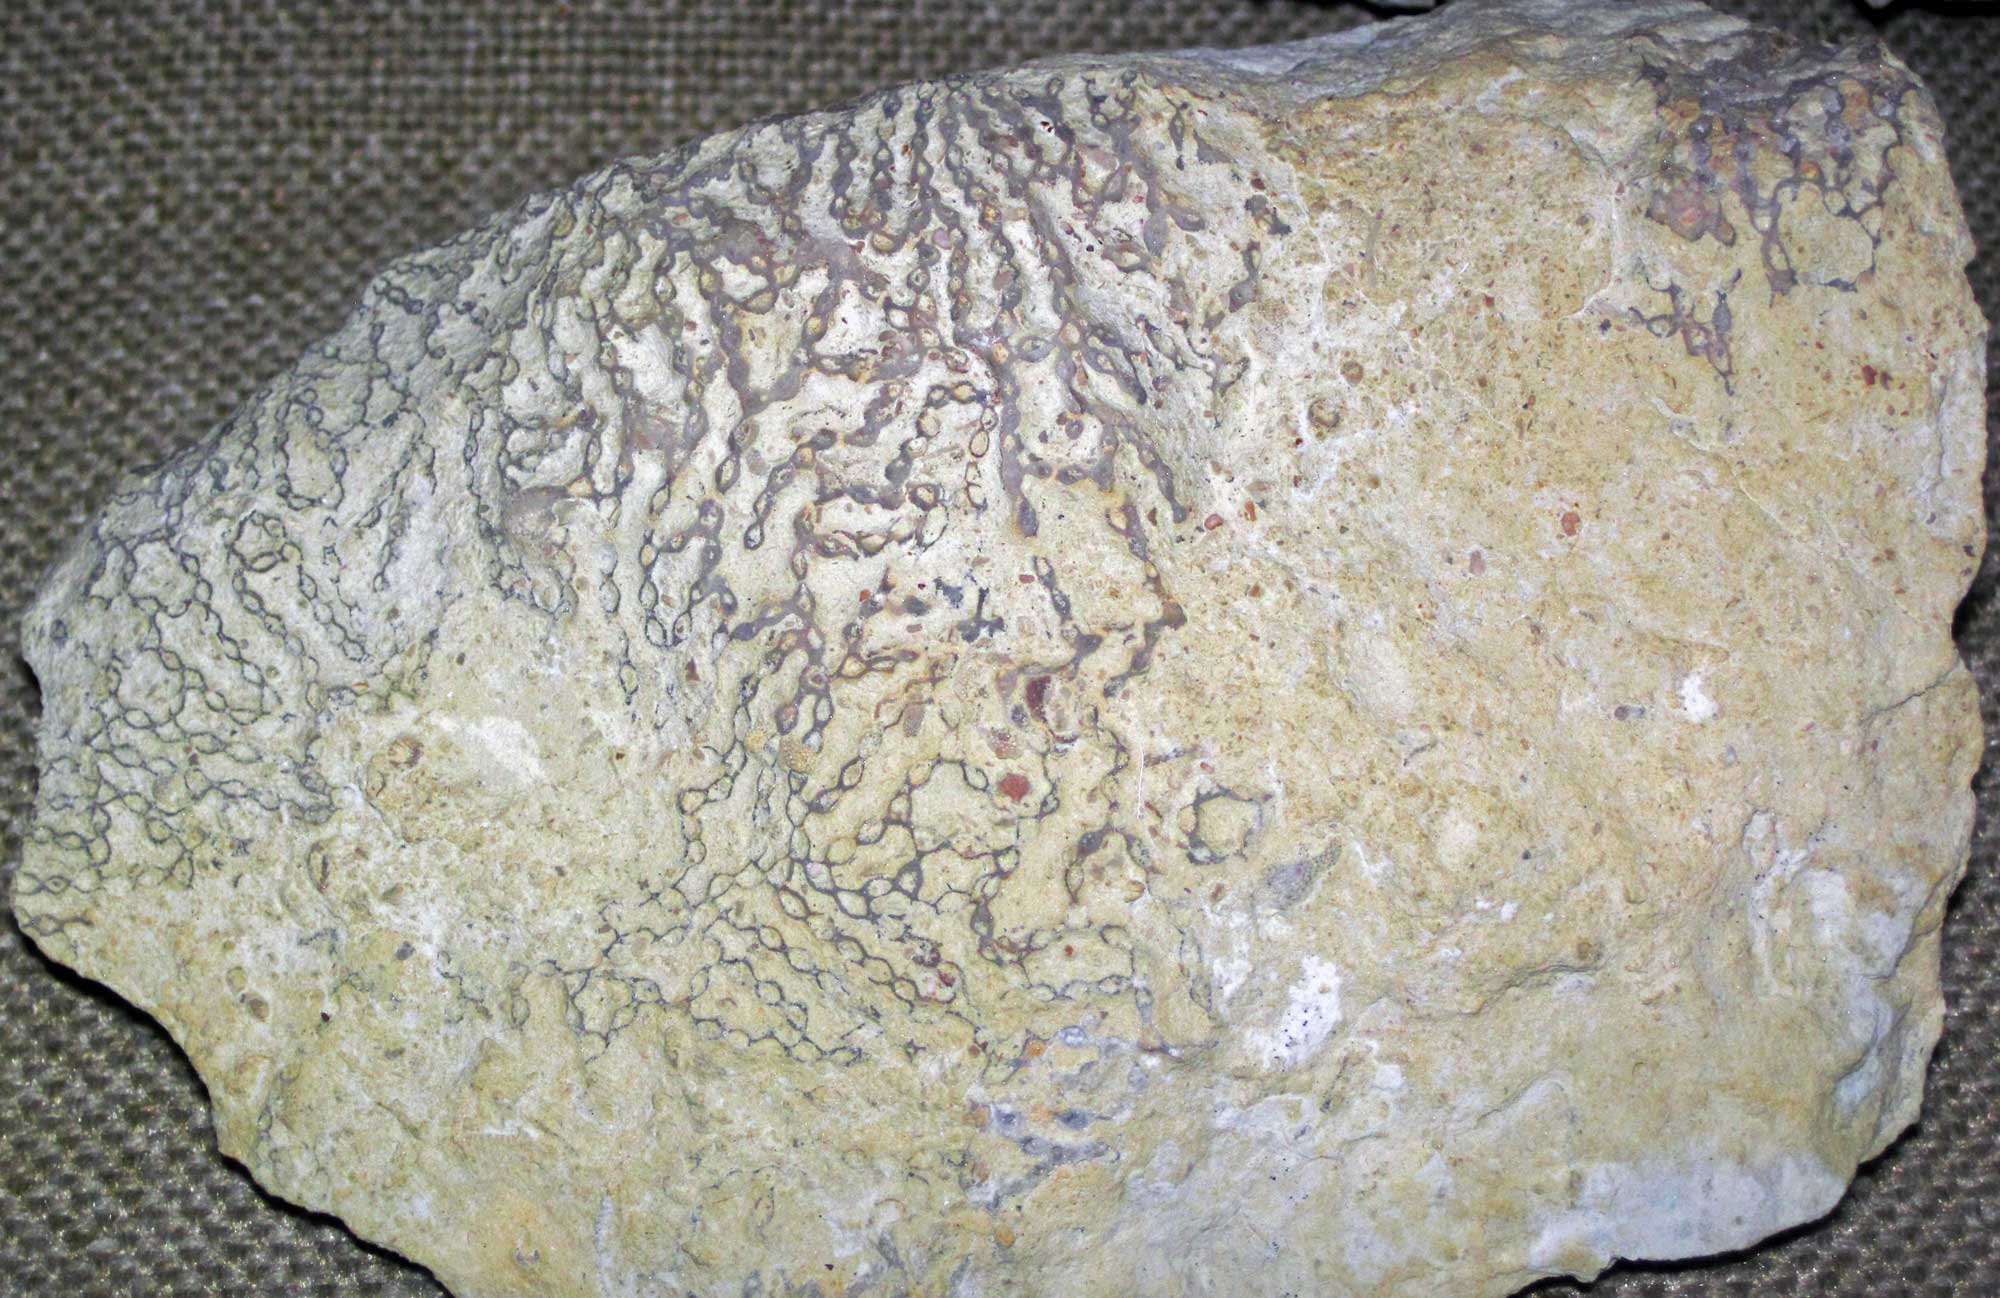 Photograph of the tabulate coral Halysites from the Silurian of Ohio. The photo shows a beige rock with a gray, chain-link-like network covering part of its upper surface.